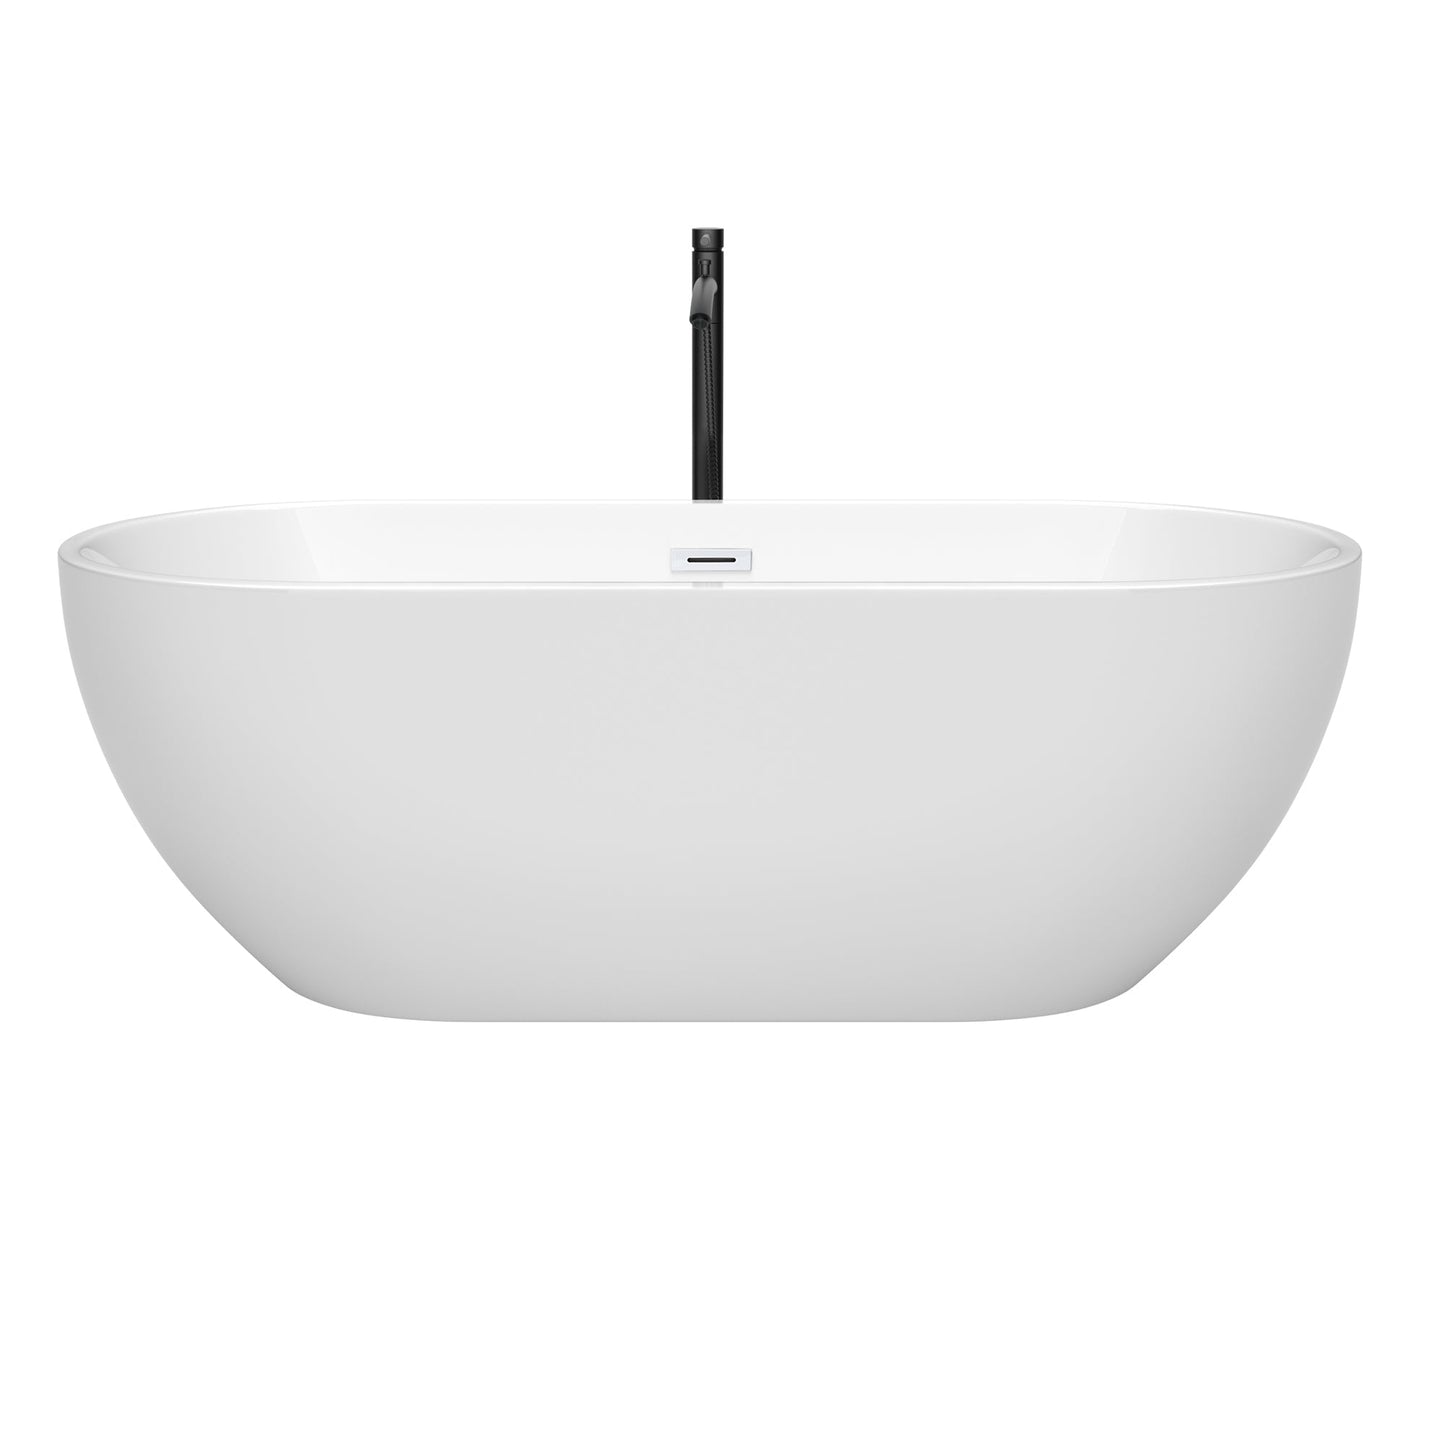 Wyndham Collection Brooklyn 67" Freestanding Bathtub in White With Shiny White Trim and Floor Mounted Faucet in Matte Black